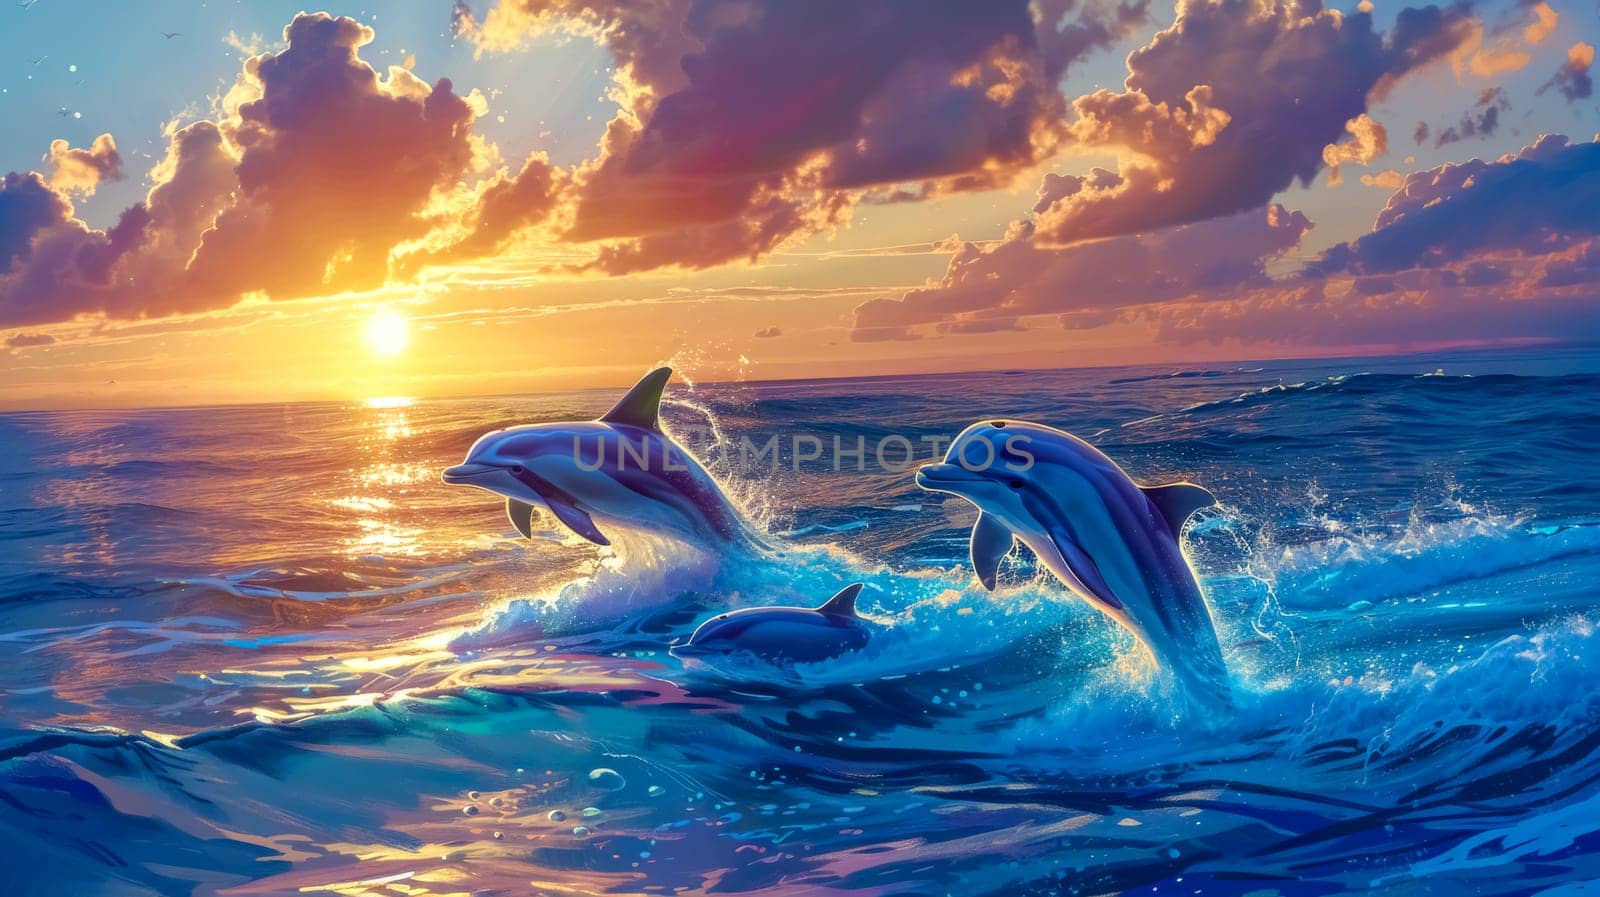 Vibrant illustration of dolphins jumping over ocean waves at golden hour by Edophoto